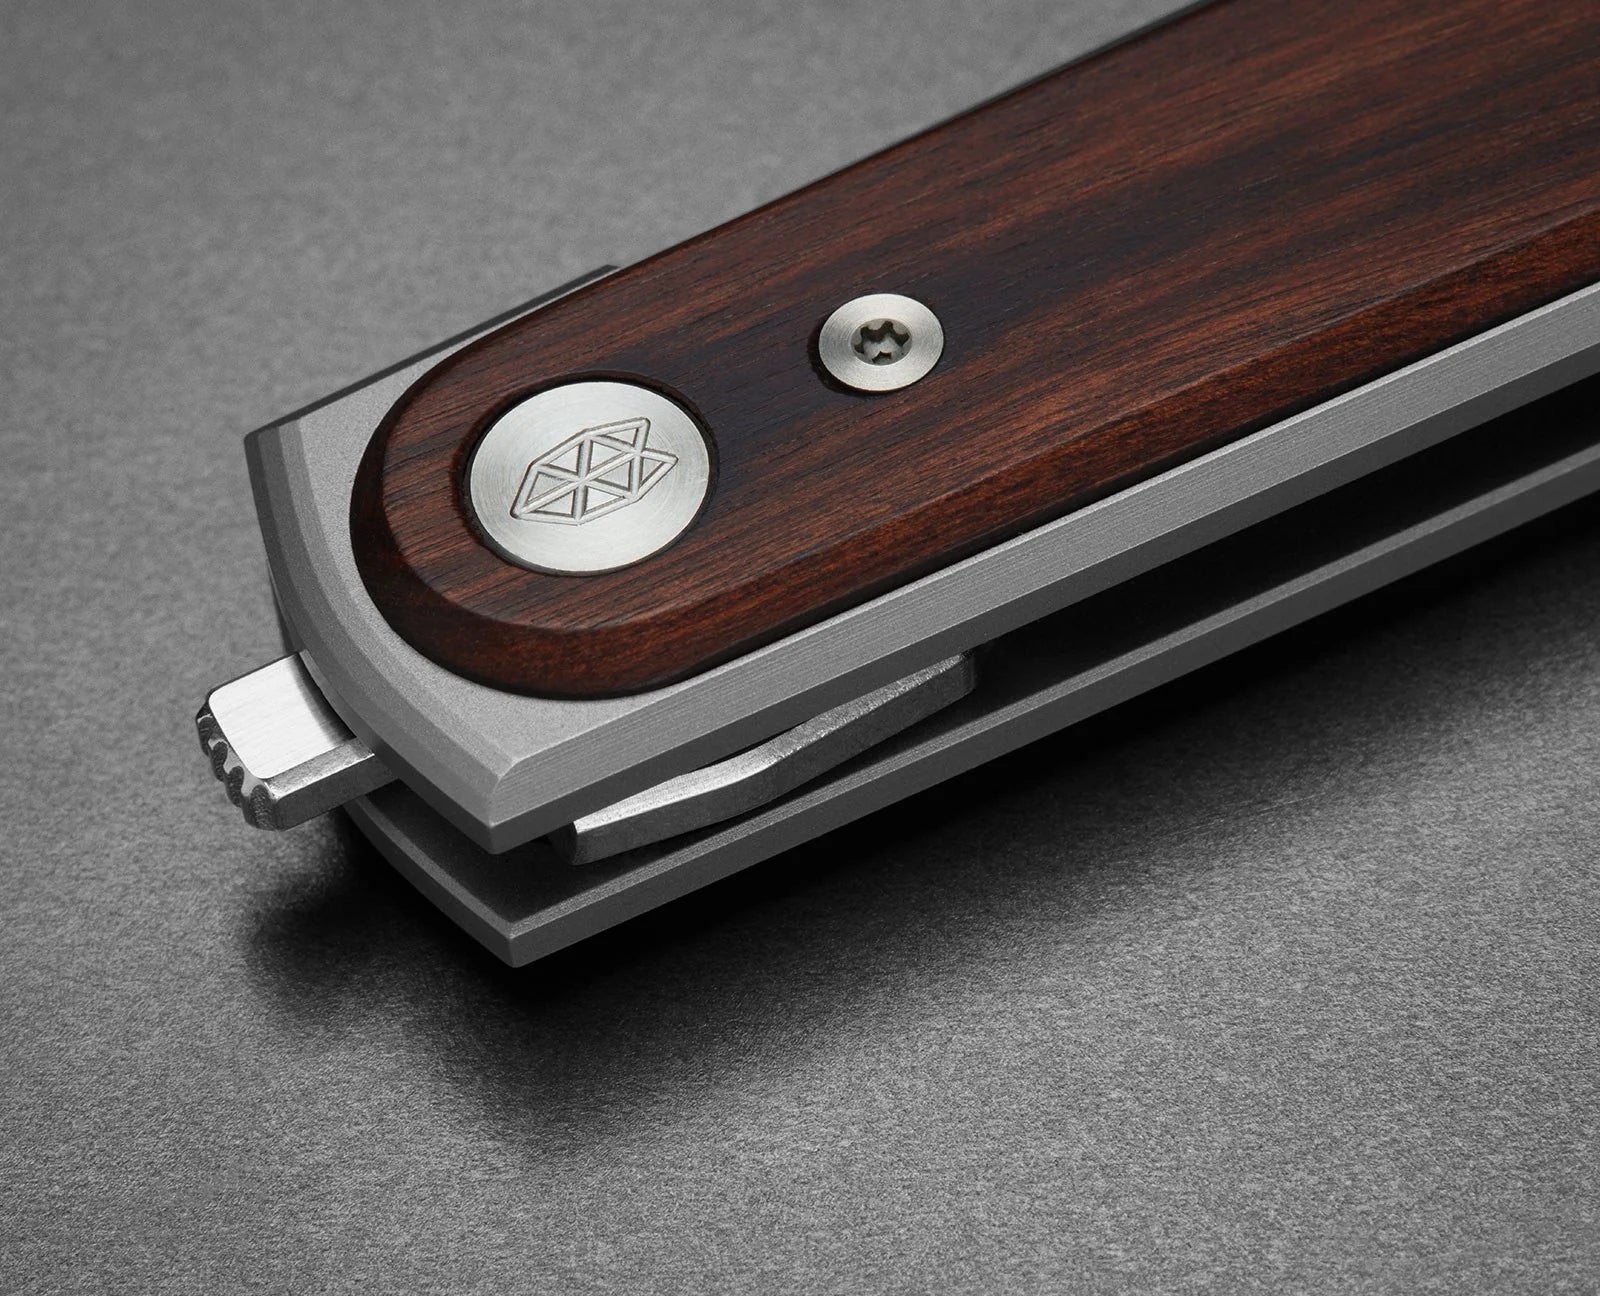 The Duval in Rosewood + Stainless